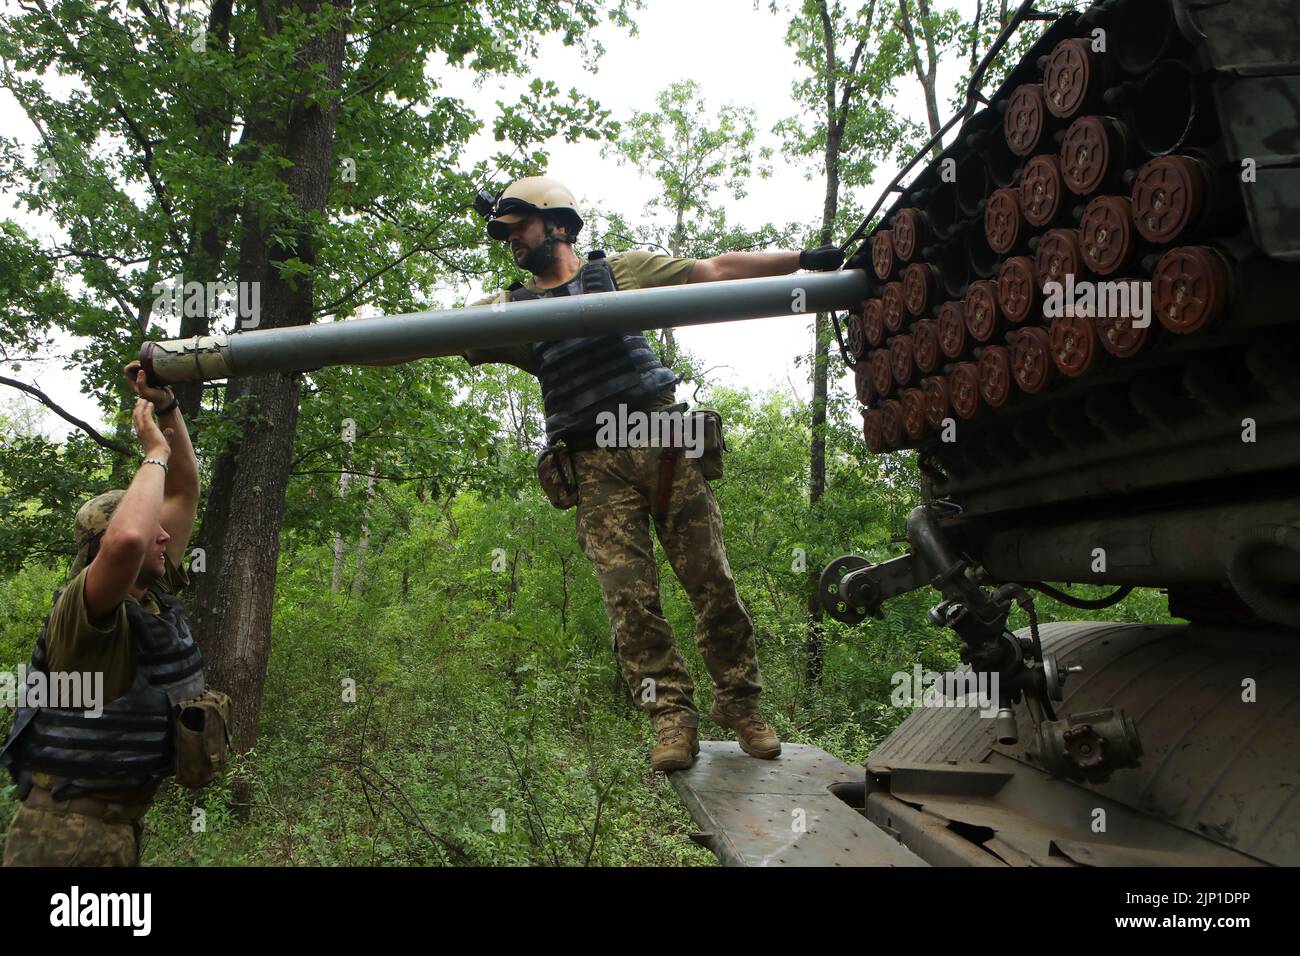 UKRAINE - AUGUST 12, 2022 - Servicemen of Ukraine's Armed Forces load missiles into a BM-21 Grad multiple rocket launcher as they get ready to perform Stock Photo